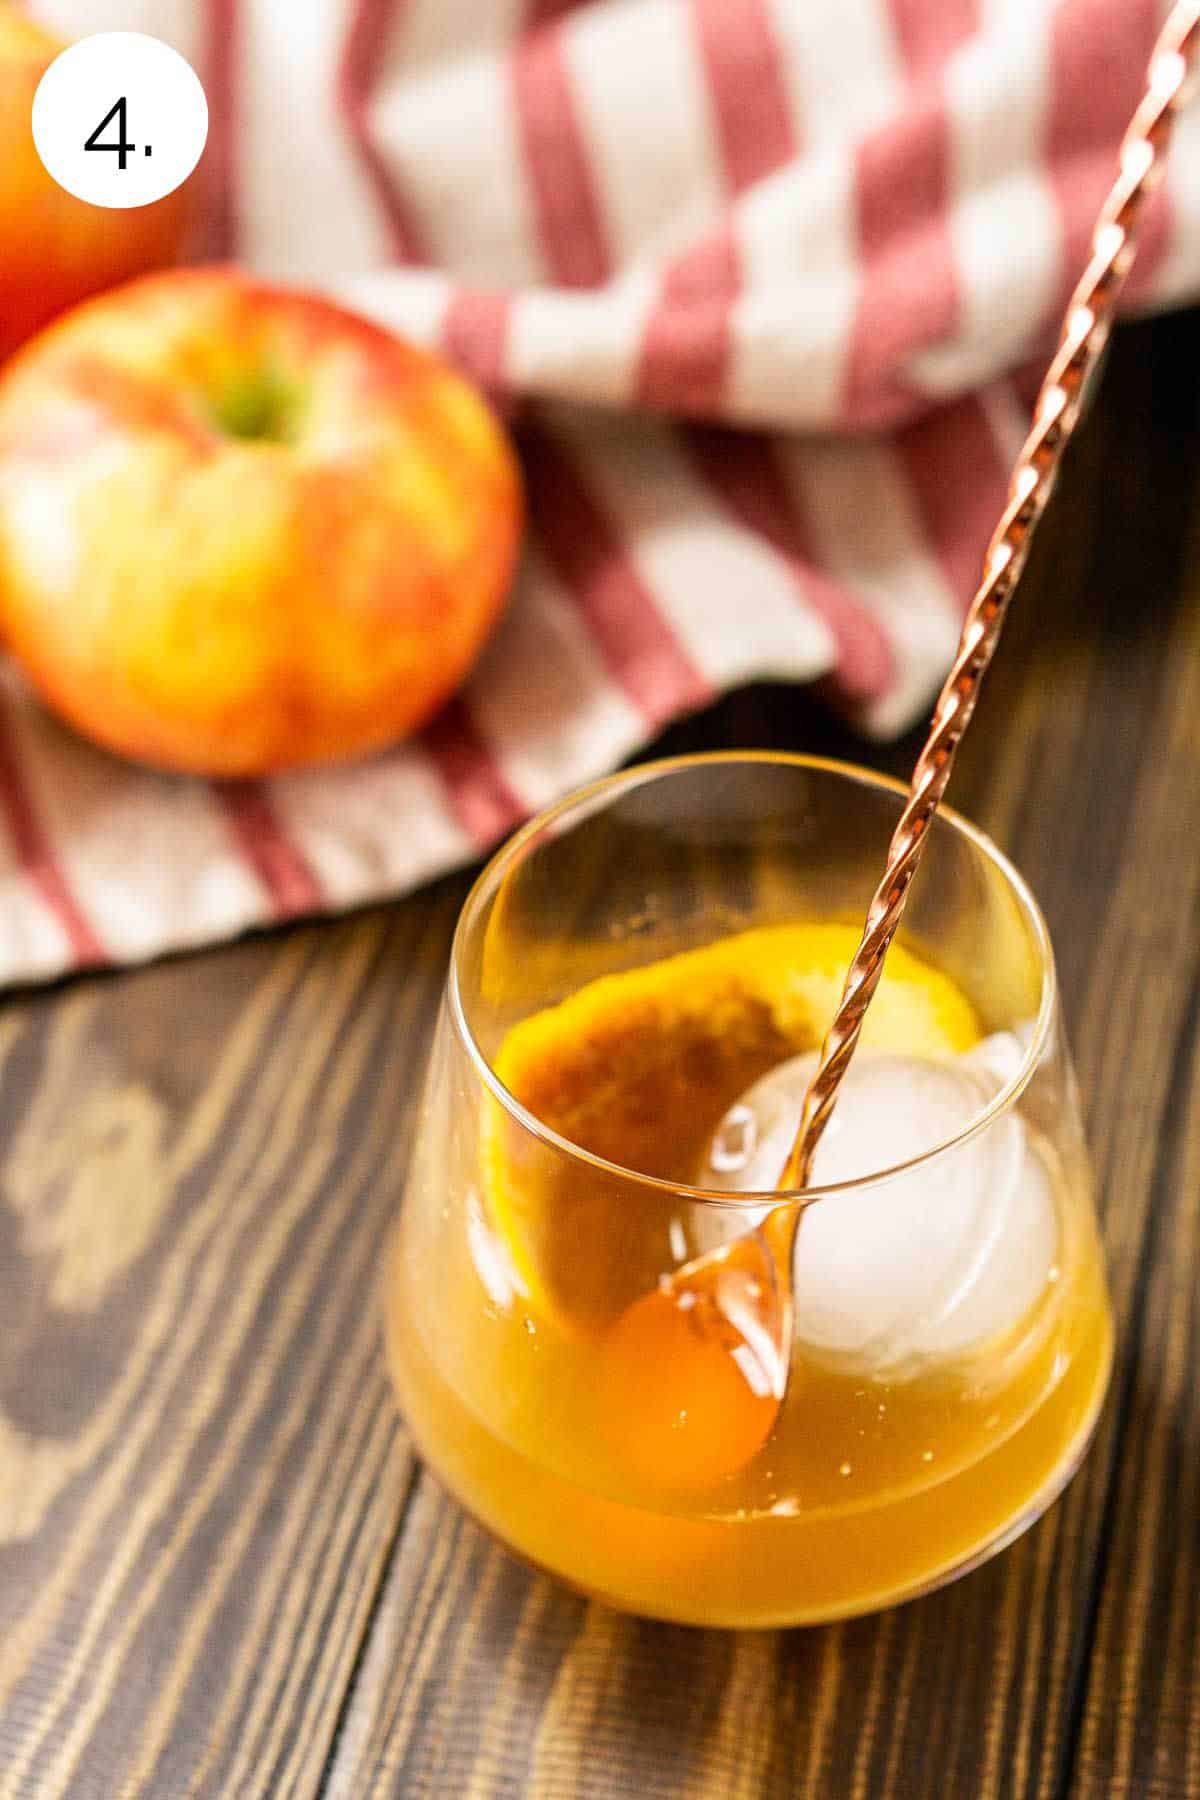 A copper bar spoon stirring the apple cider and other ingredients with a large ice cube on a brown wooden board.